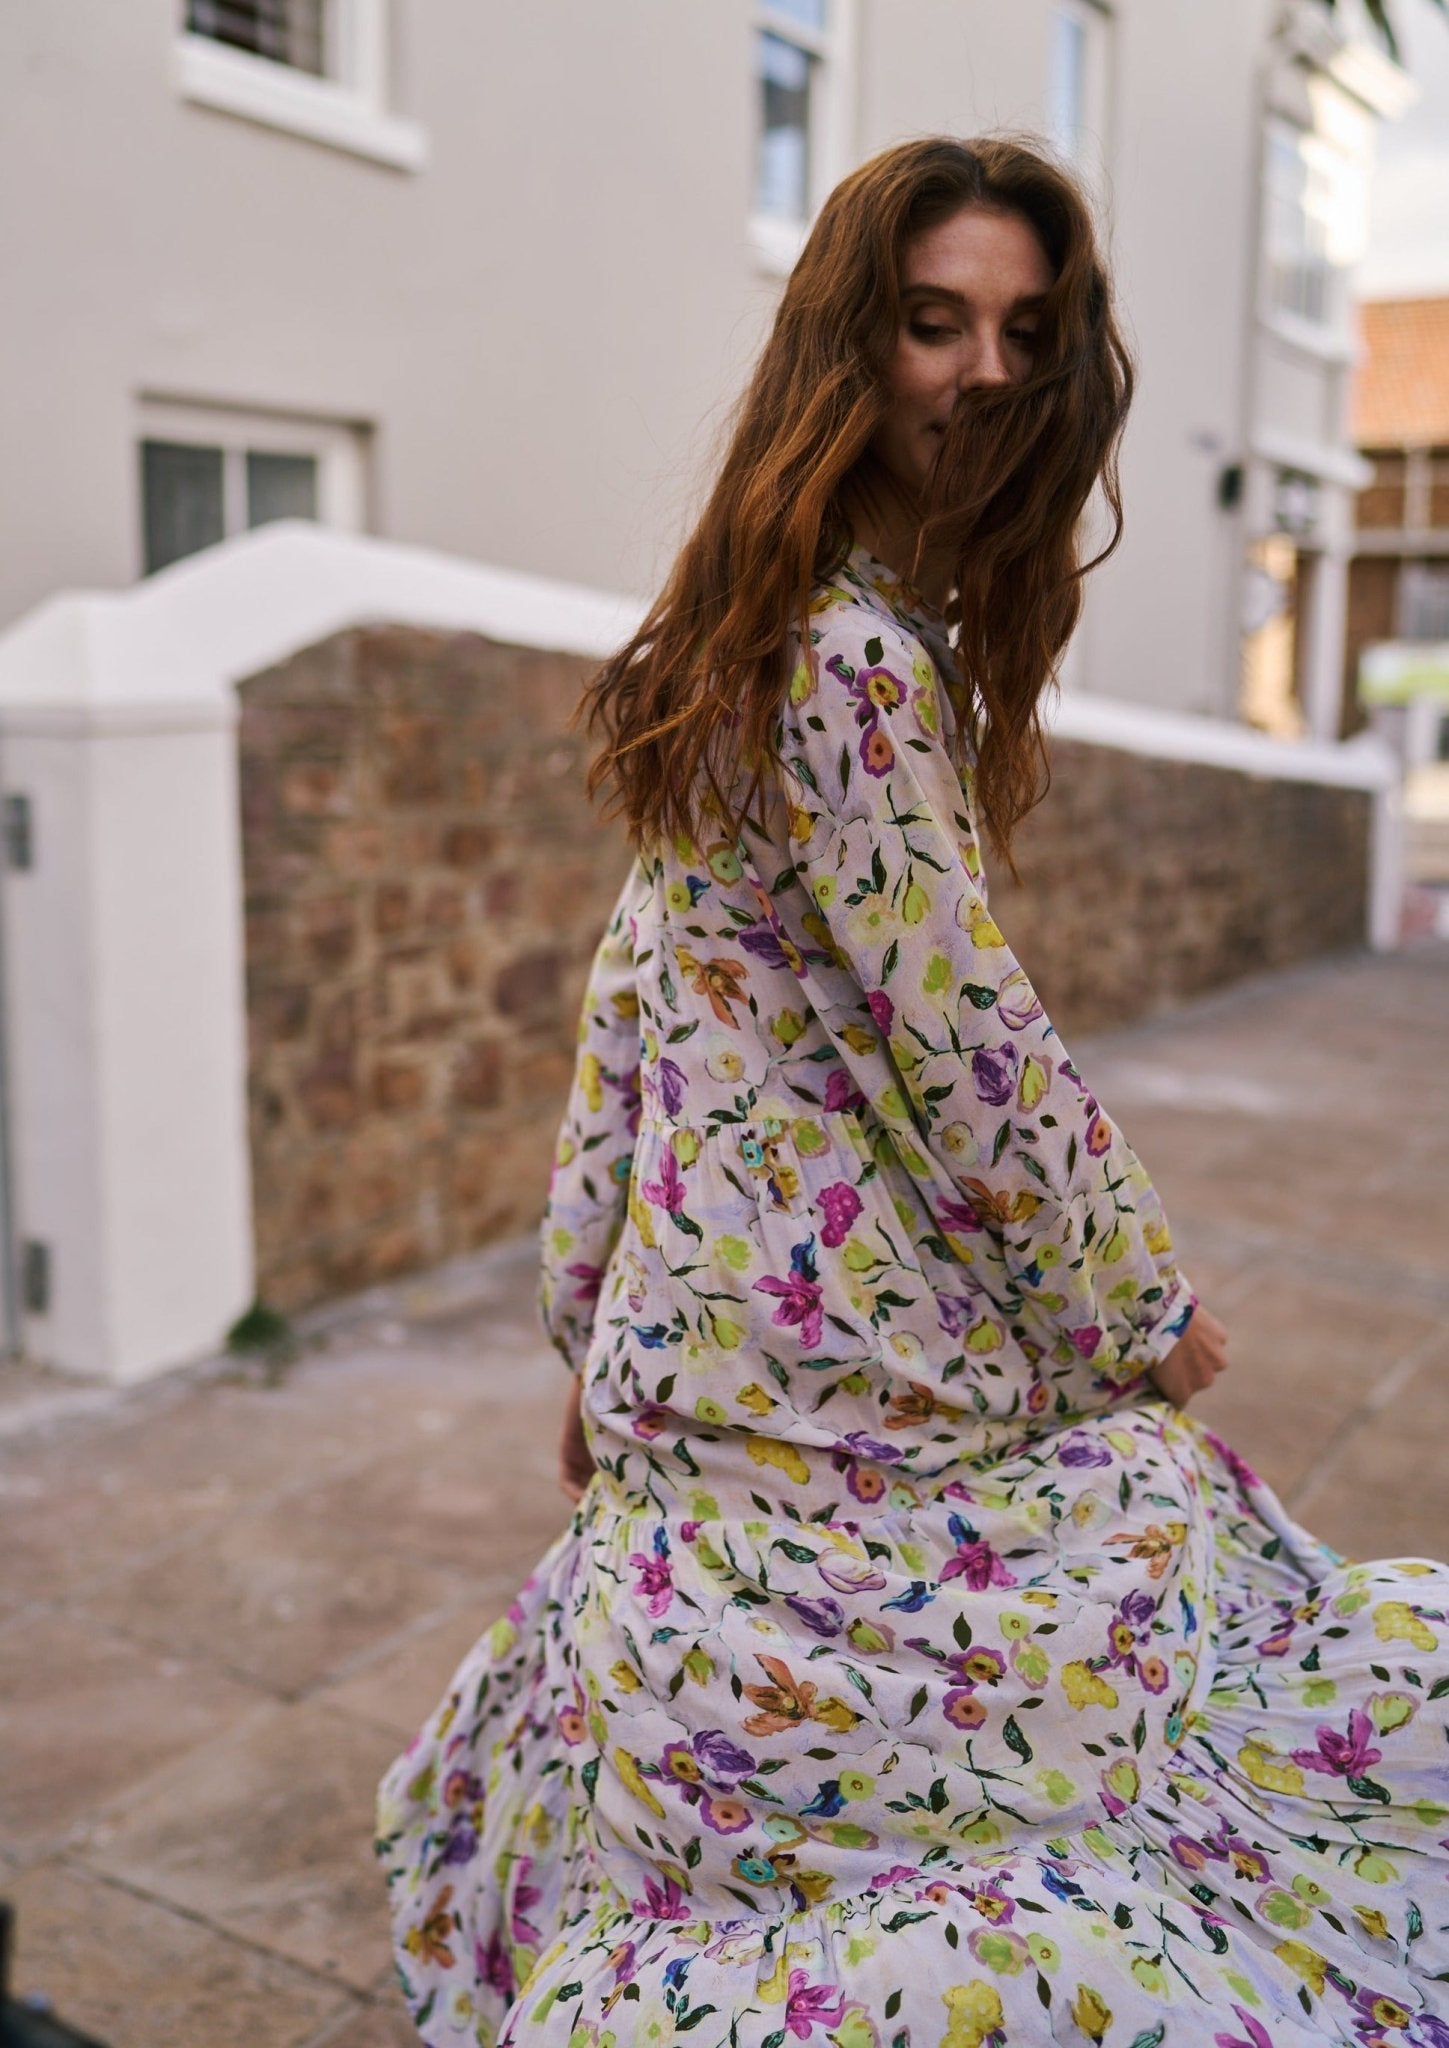 Bohemian Shirt Dress with Yellow and Lilac Floral Print - Tribute StoreTRIBUTE